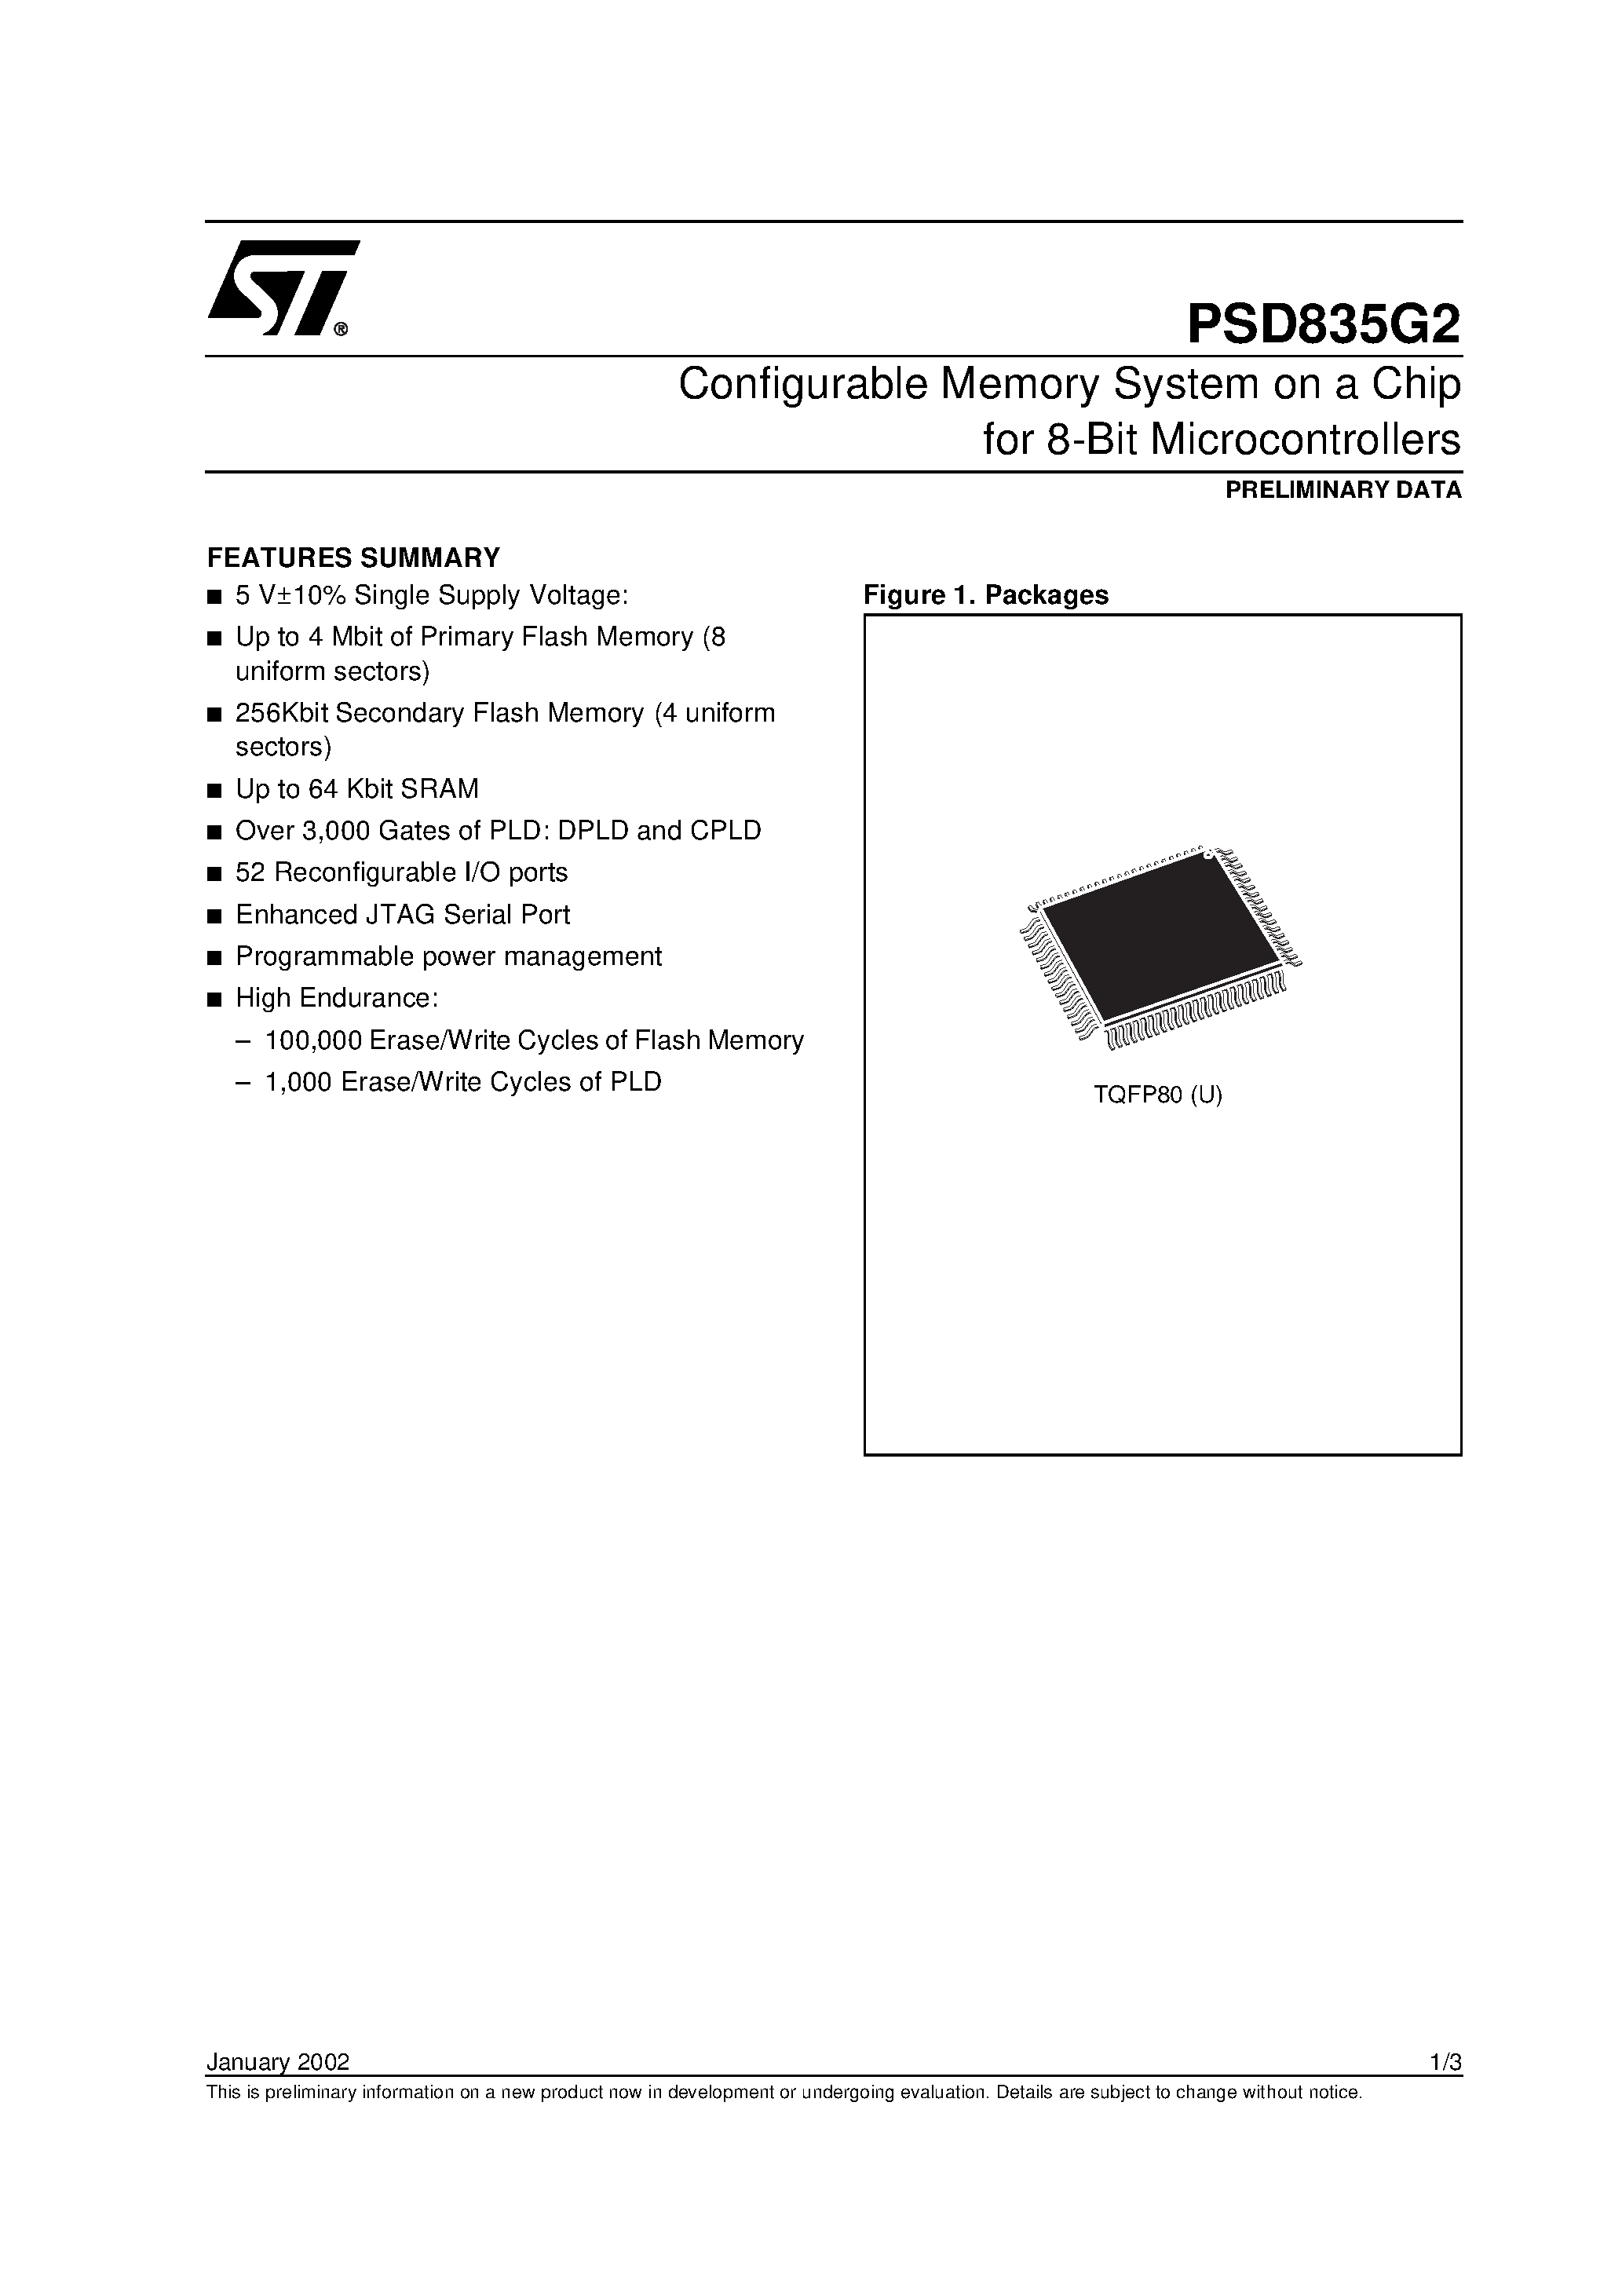 Datasheet PSD835F1V-A-15JI - Configurable Memory System on a Chip for 8-Bit Microcontrollers page 1